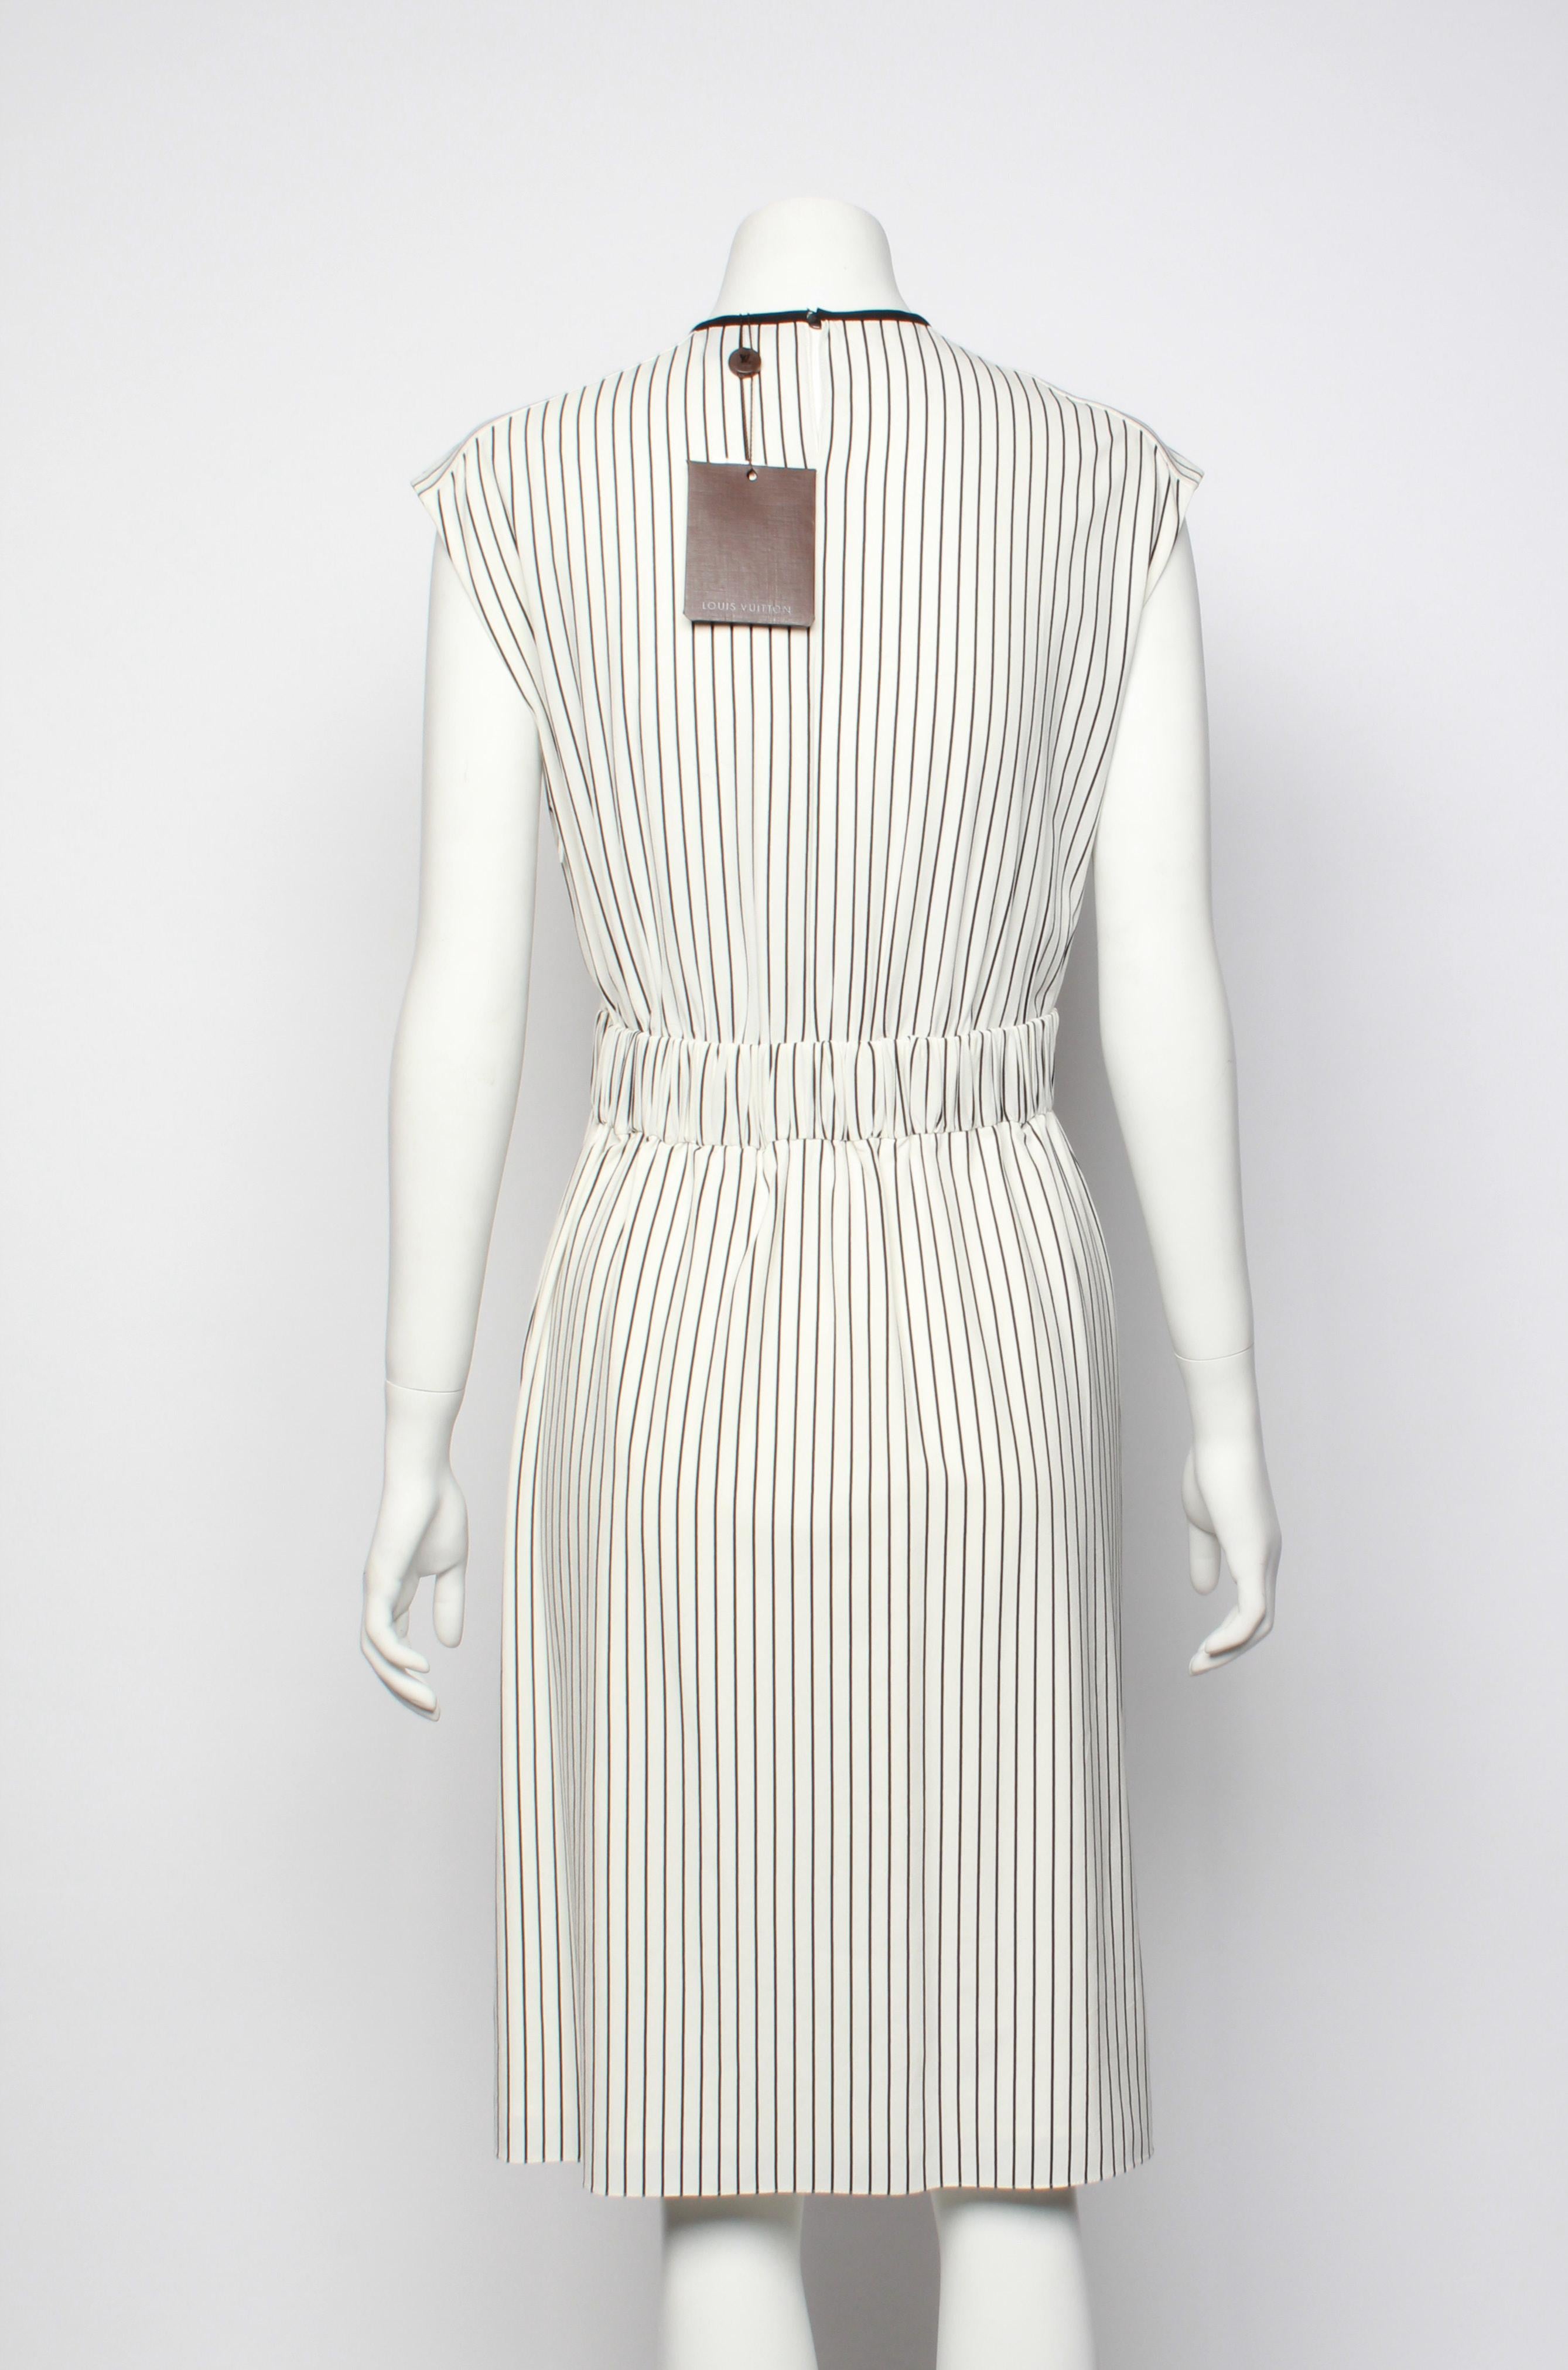 Louis Vuitton Ruffle Striped Dress In Good Condition For Sale In Melbourne, Victoria